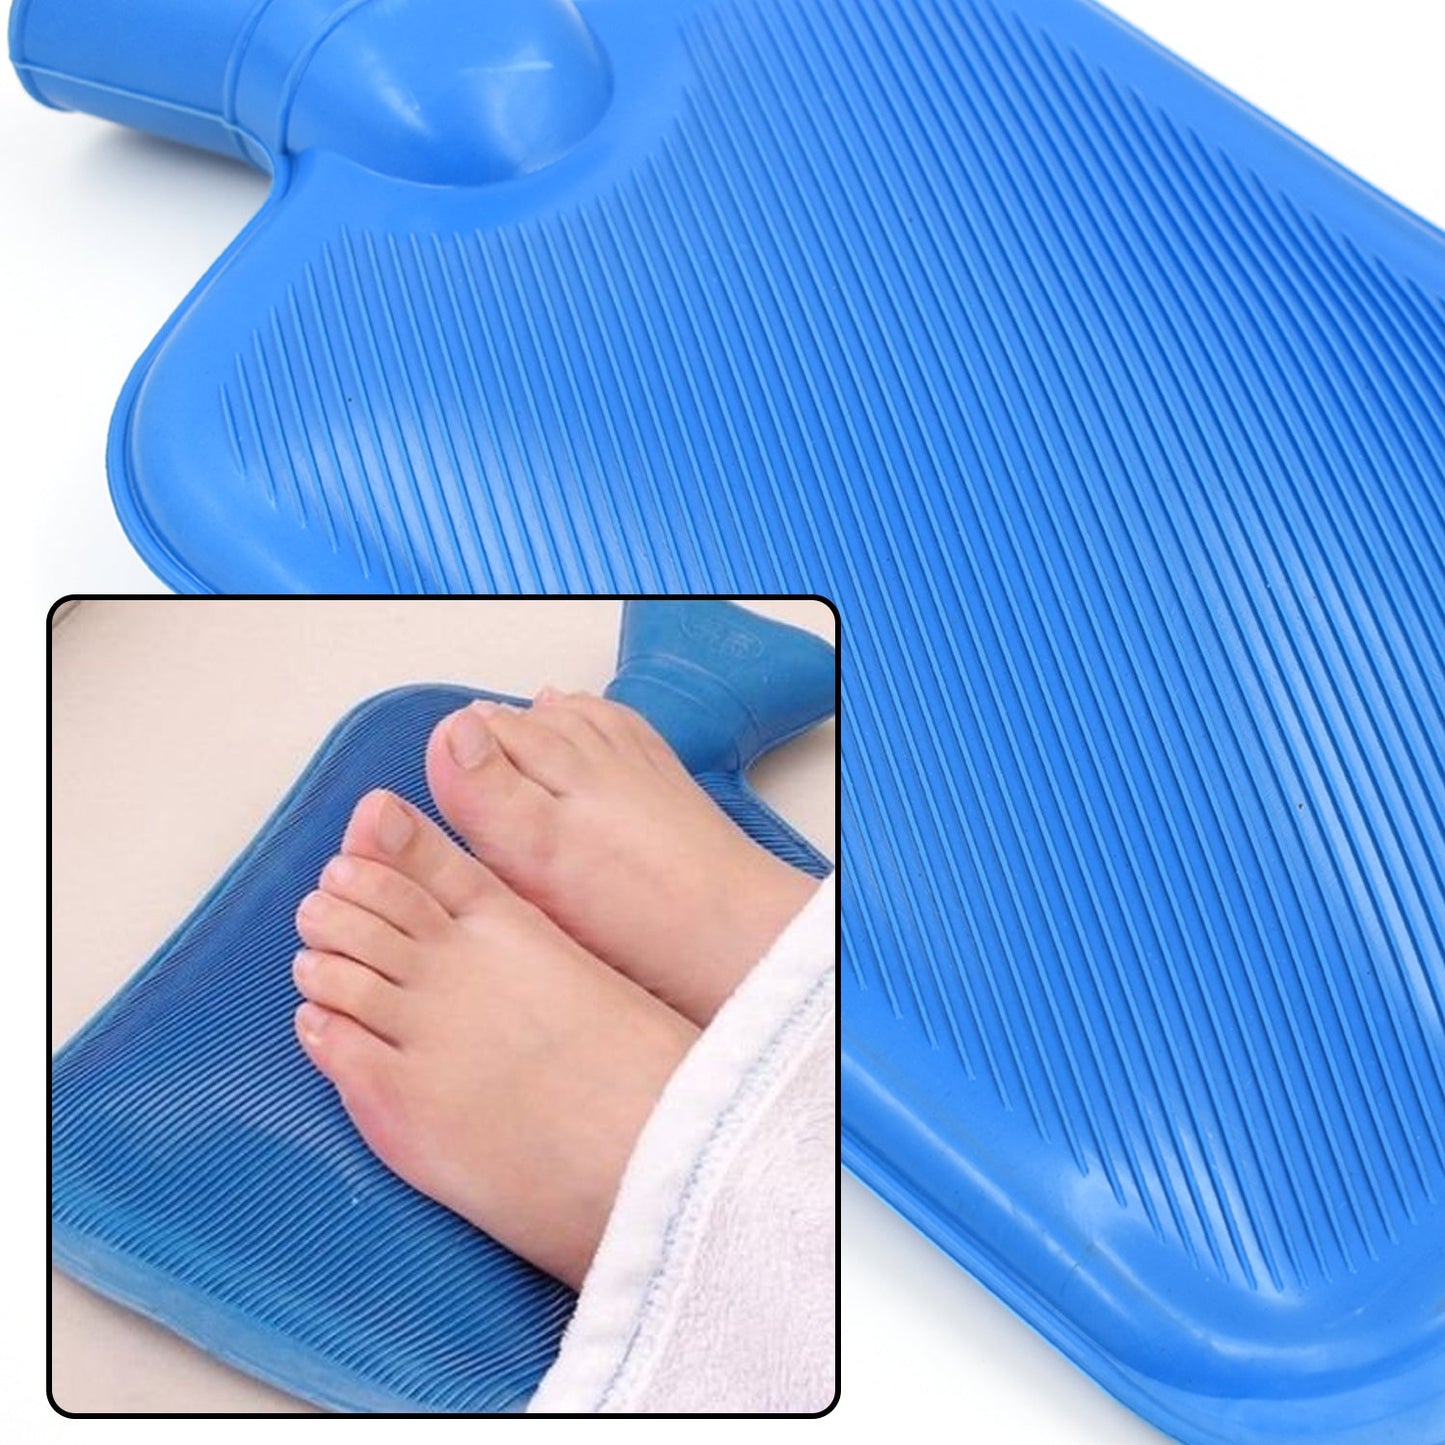 1454 Hot water Bag 2000 ML used in all kinds of household and medical purposes as a pain relief from muscle and neural problems. 